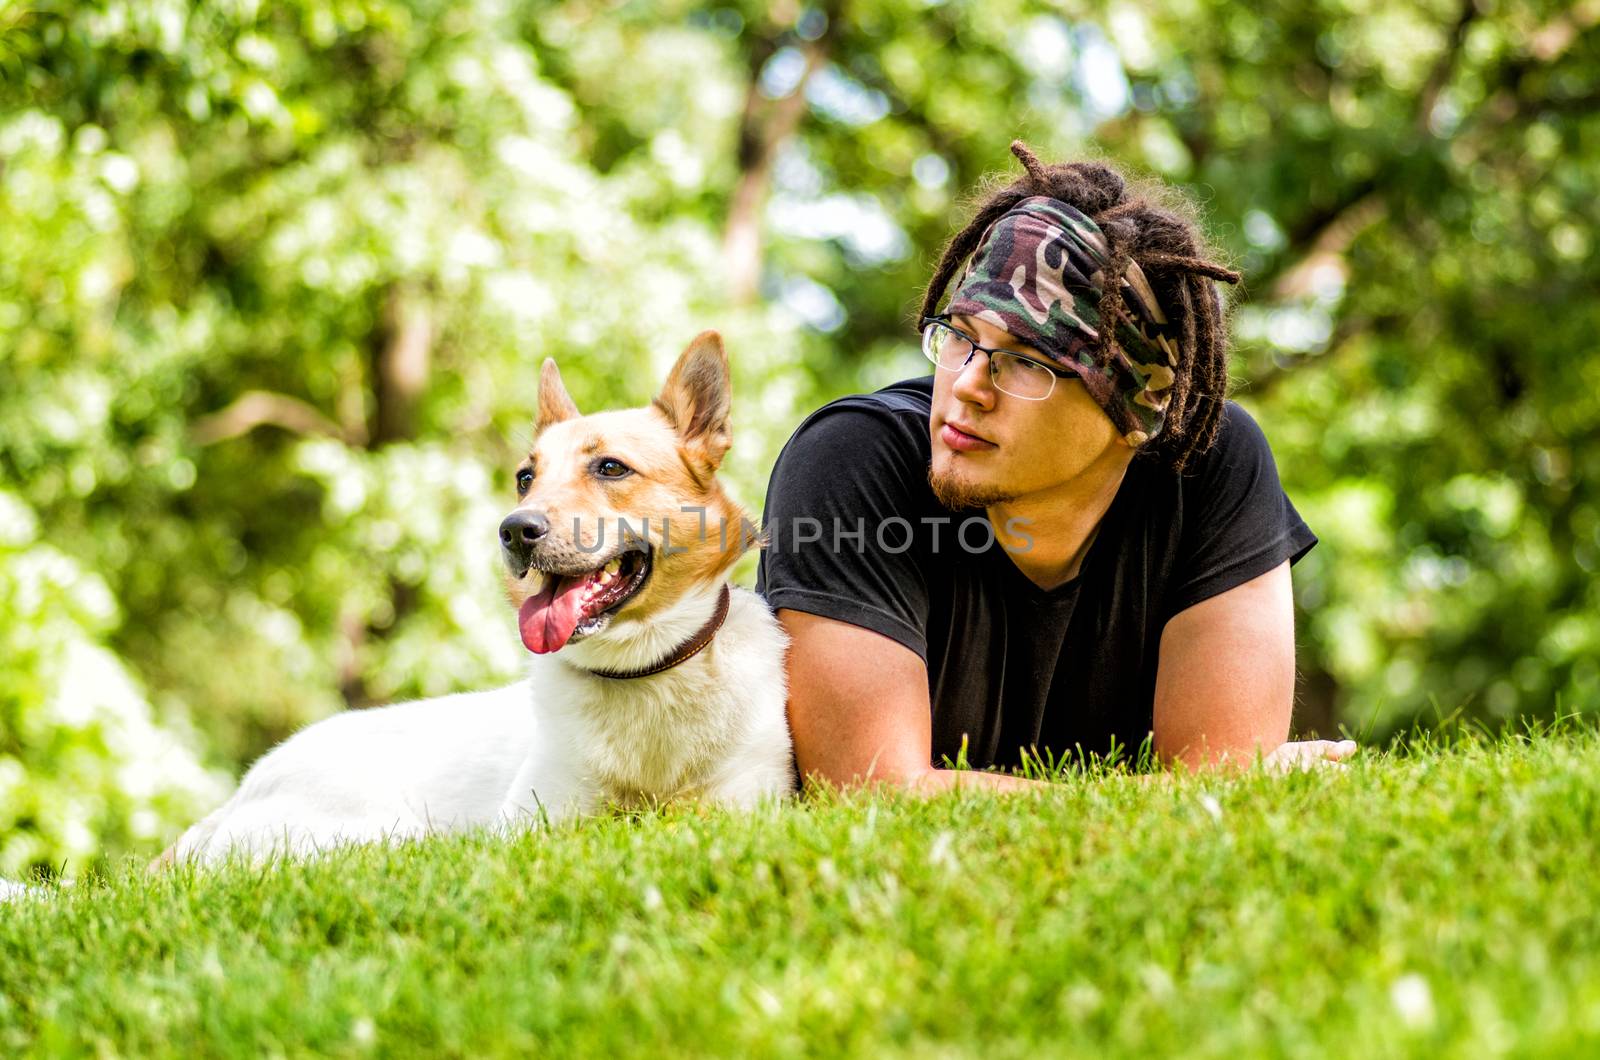 young man with dreadlocks is laying on the grass with his dog by Desperada